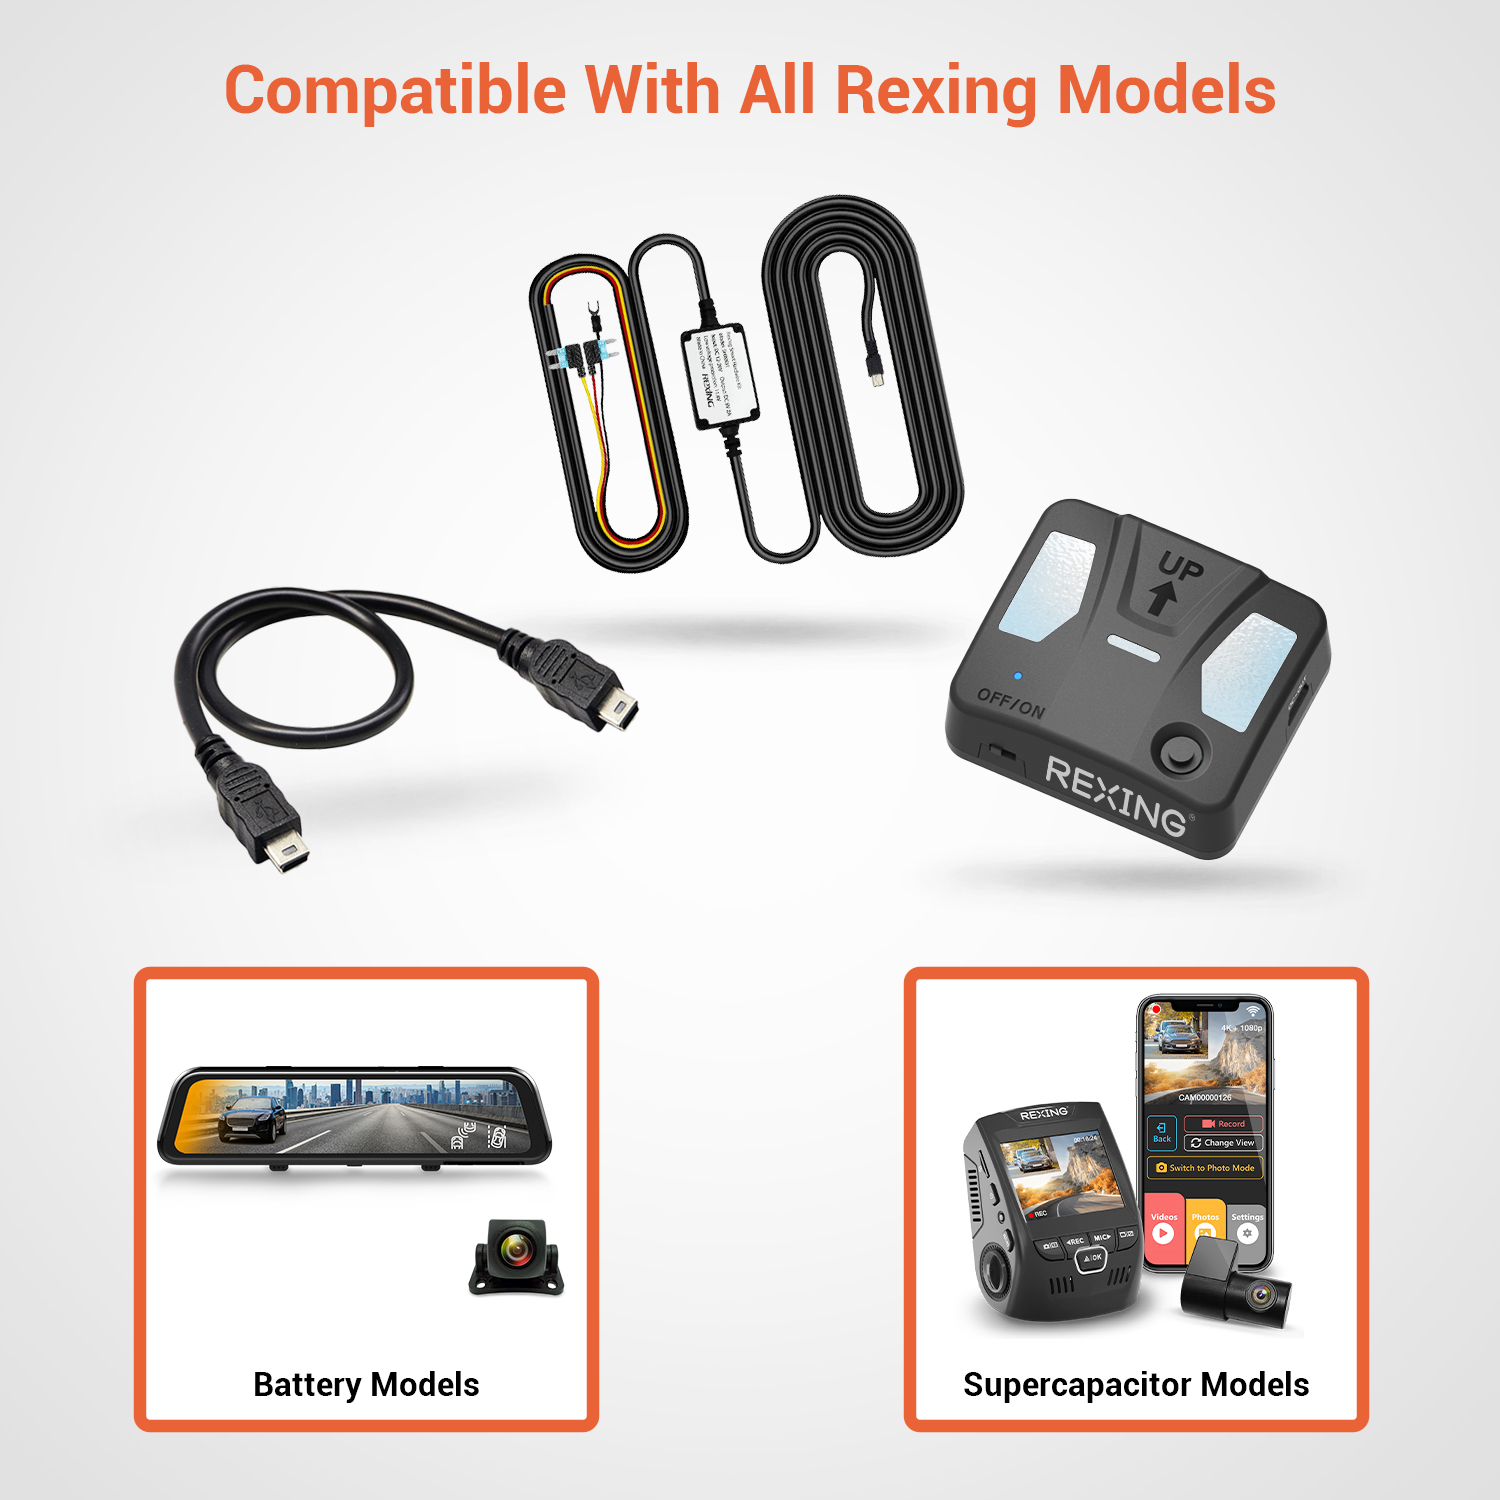 Rexing Intelligent Hardwire Kit Type-C Port for All Rexing Dash Cam Models  including R4, DT2, and M2 Max